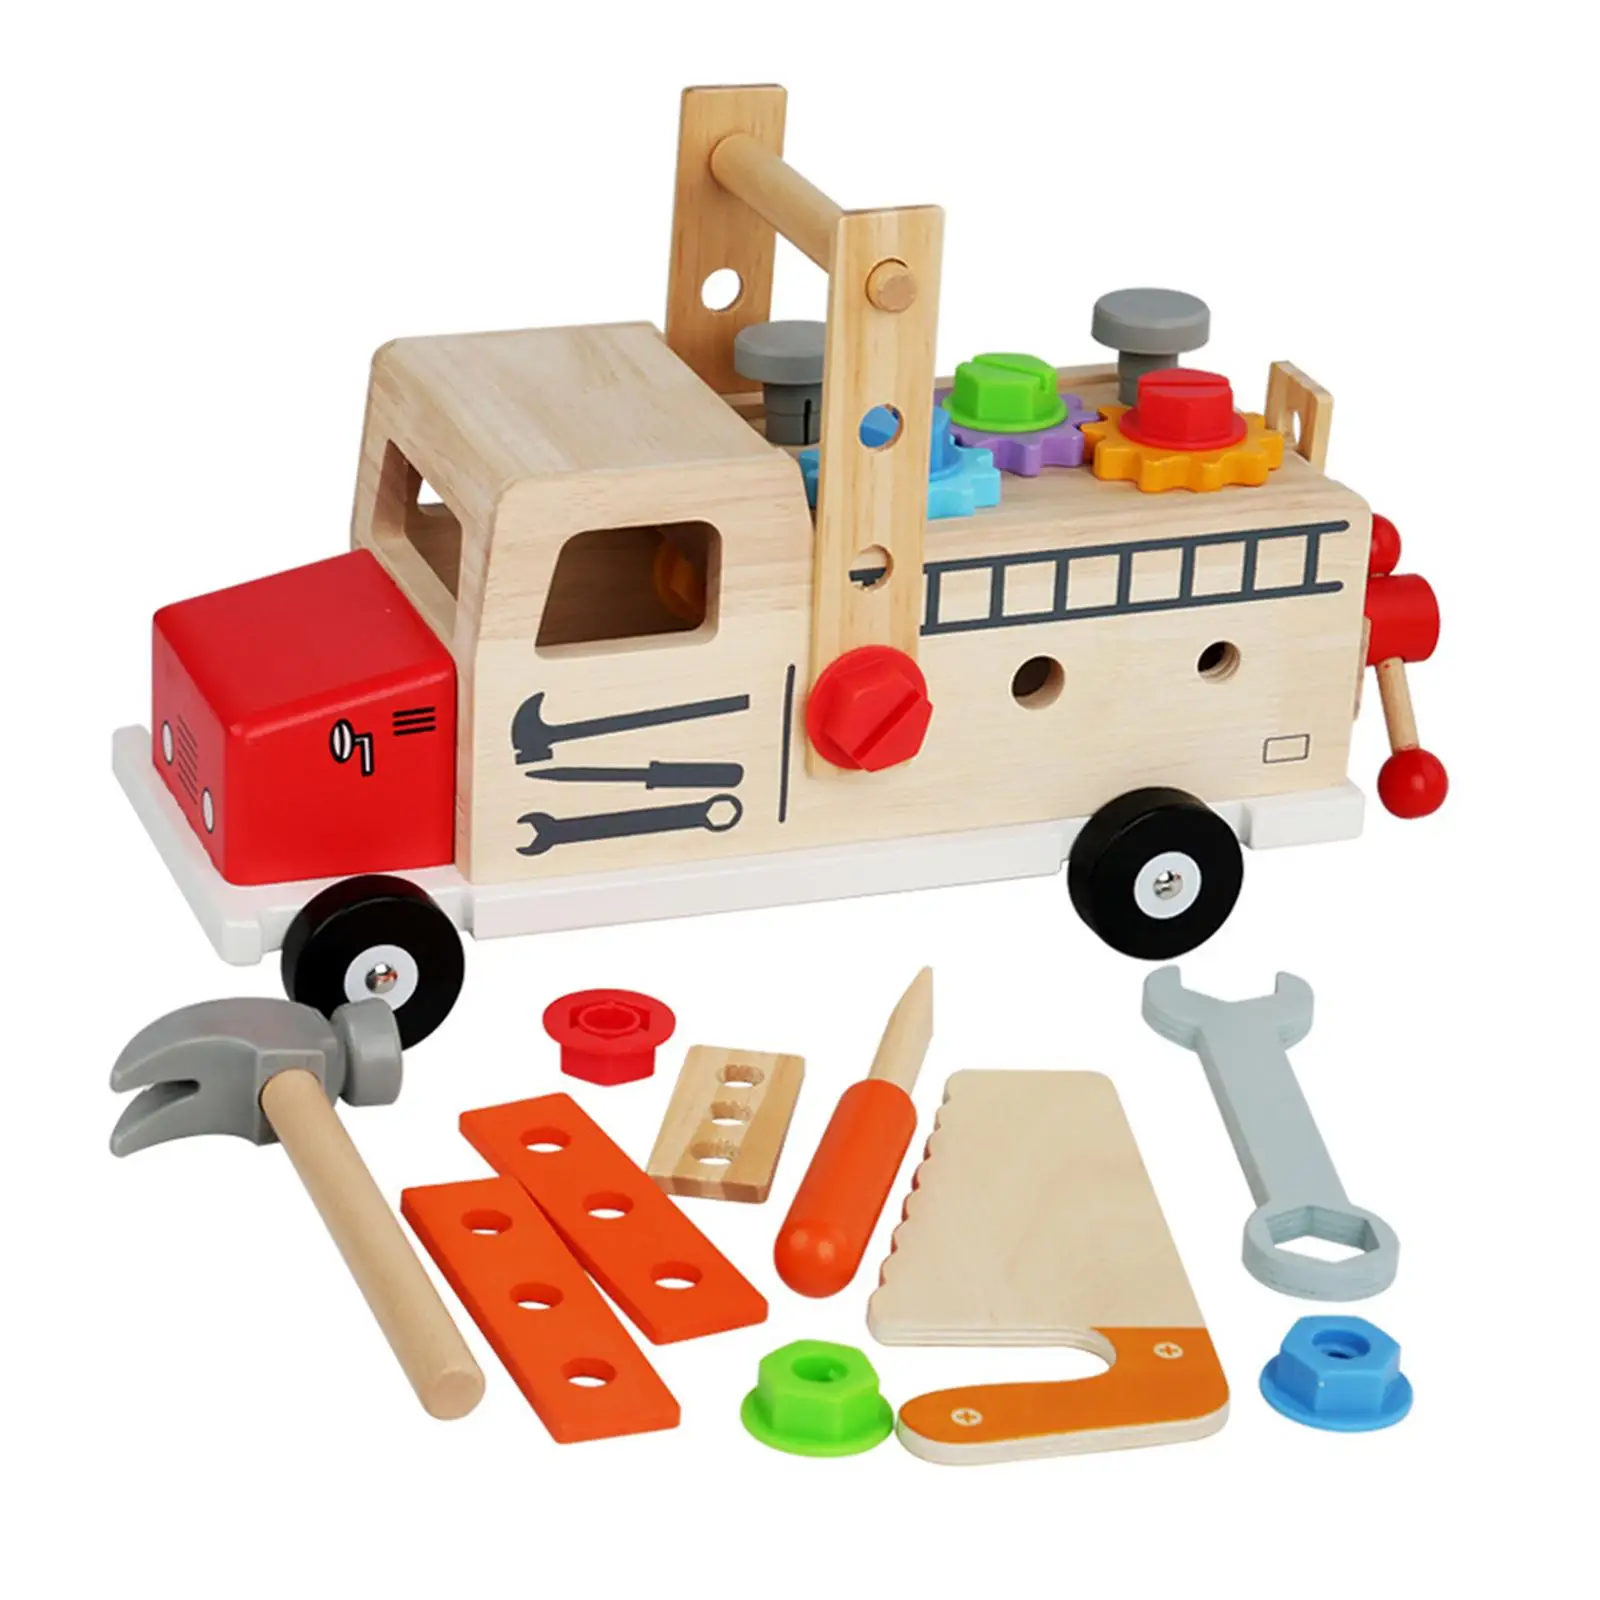 Pretend Play Tool Kits Construction Toy Stem Wood Kids Tool Set for Age 3+